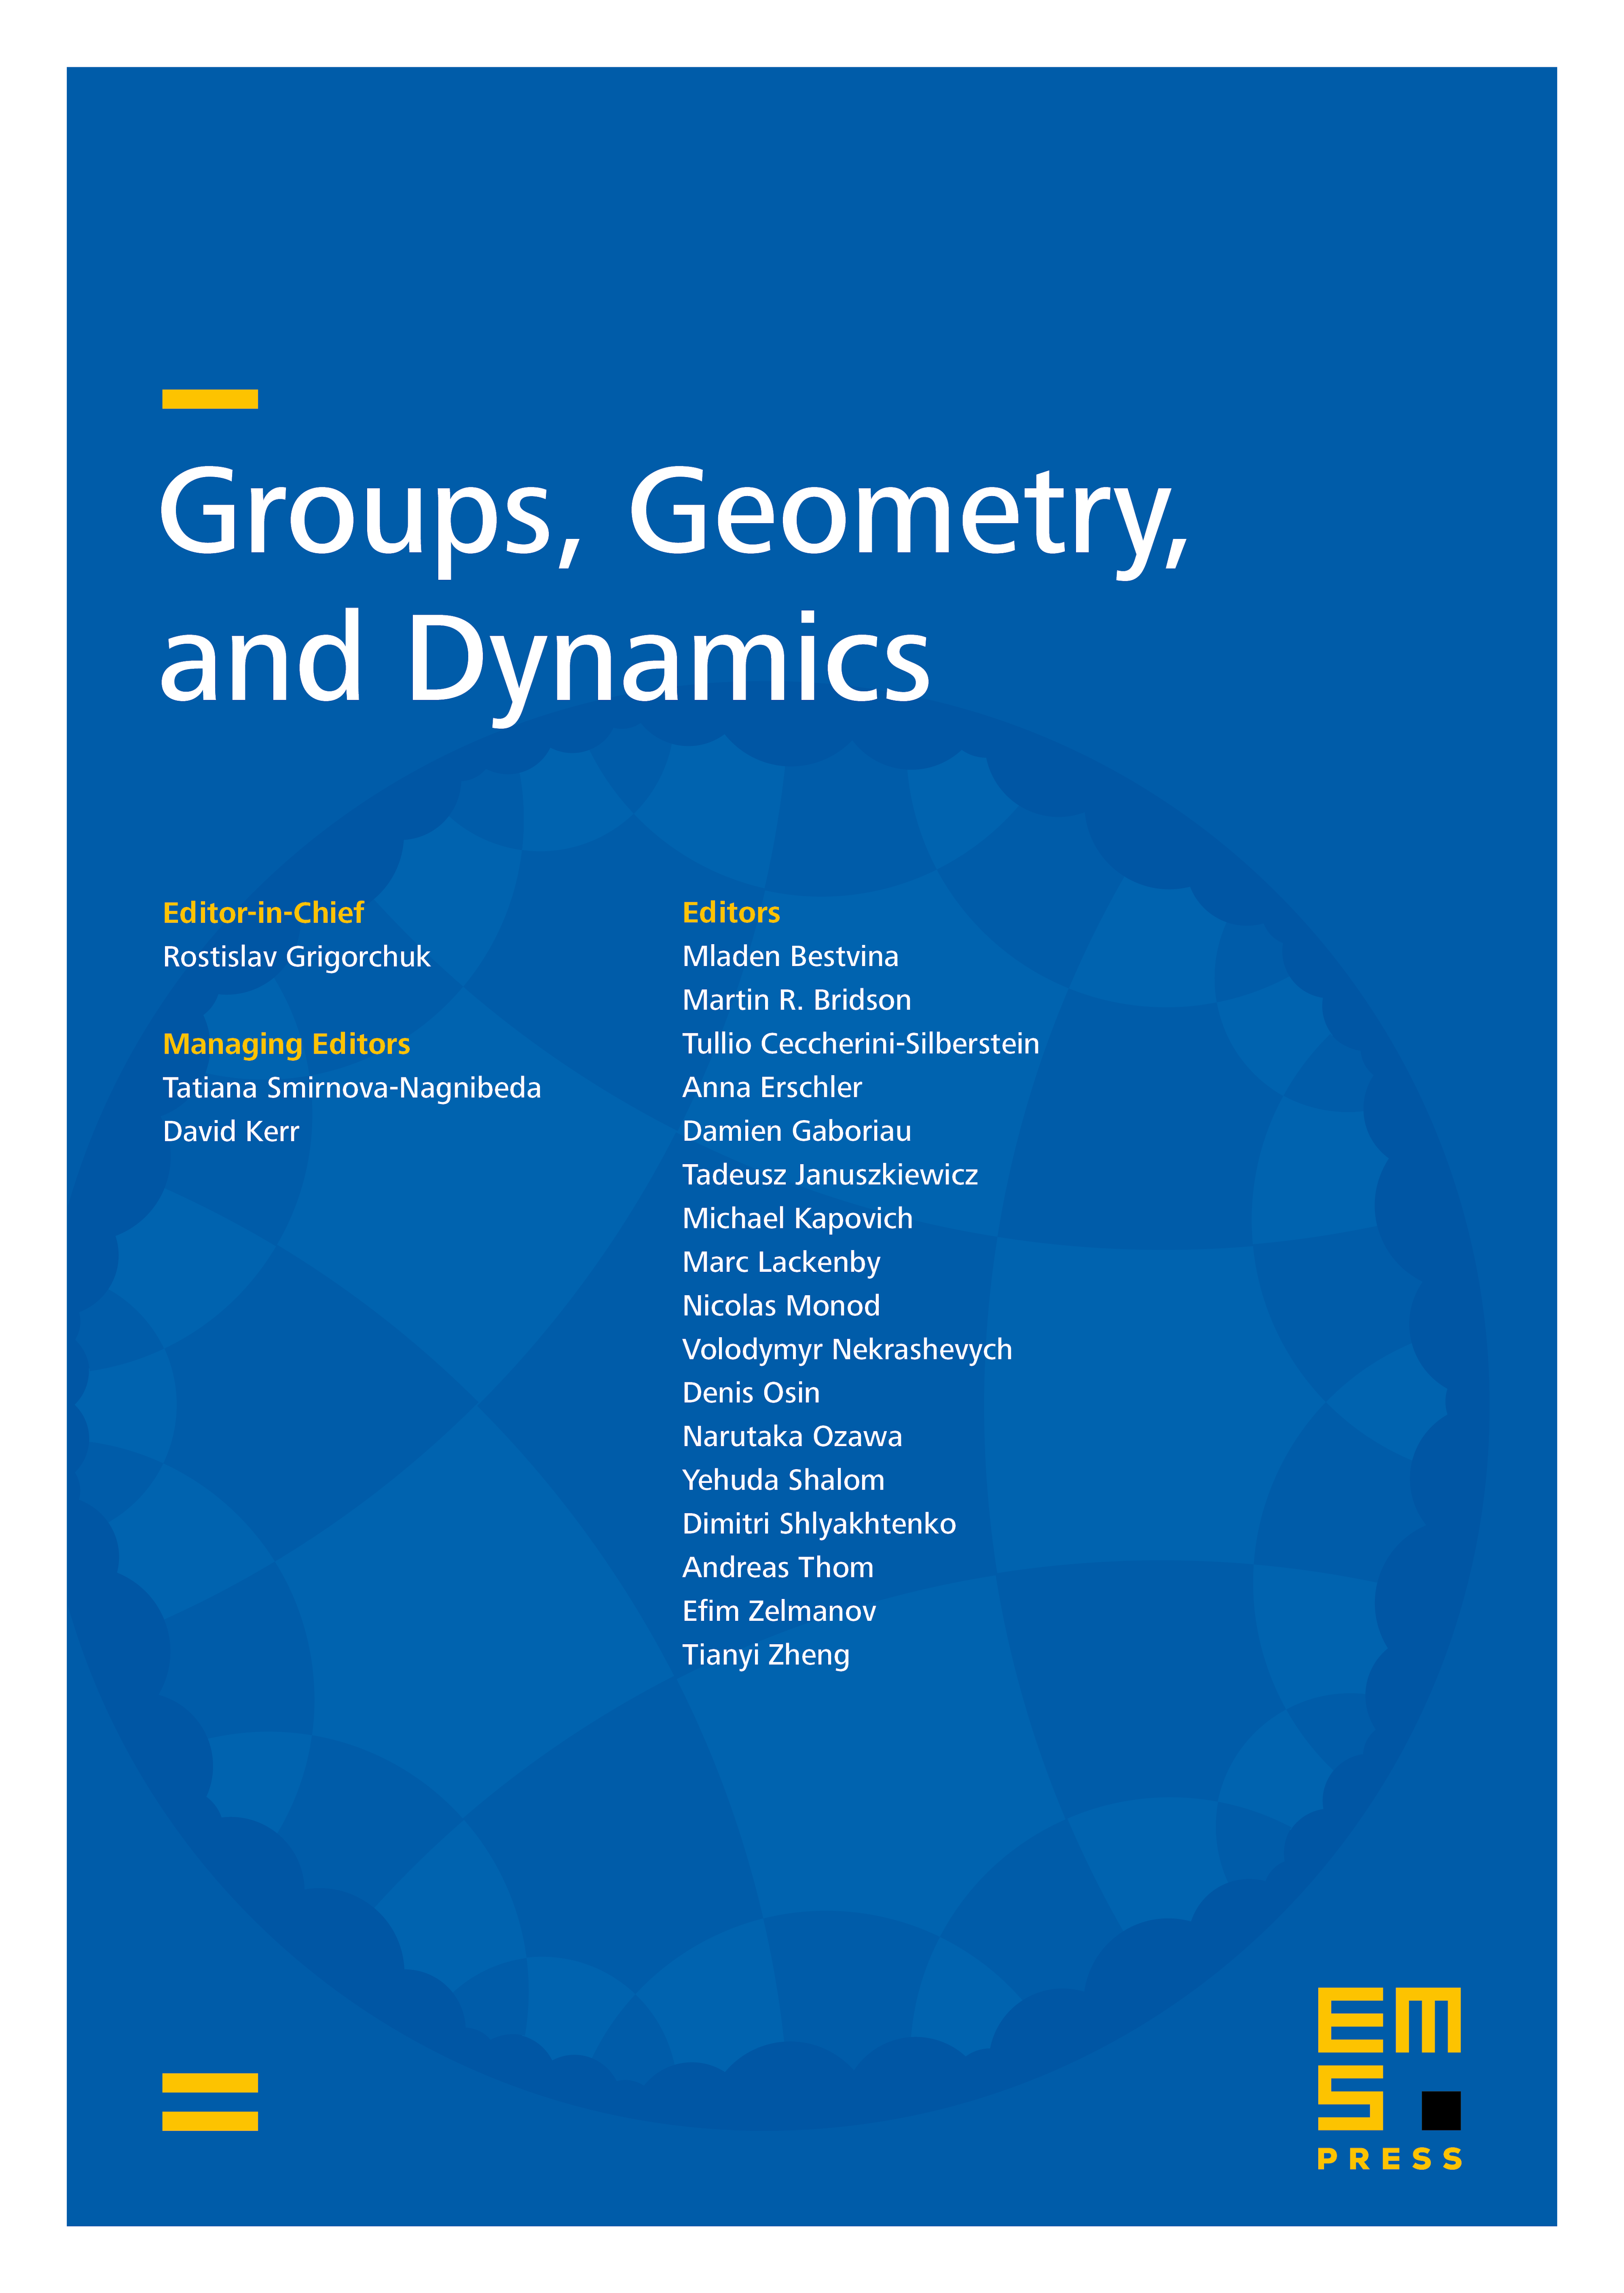 Day’s fixed point theorem, group cohomology and quasi-isometric rigidity cover